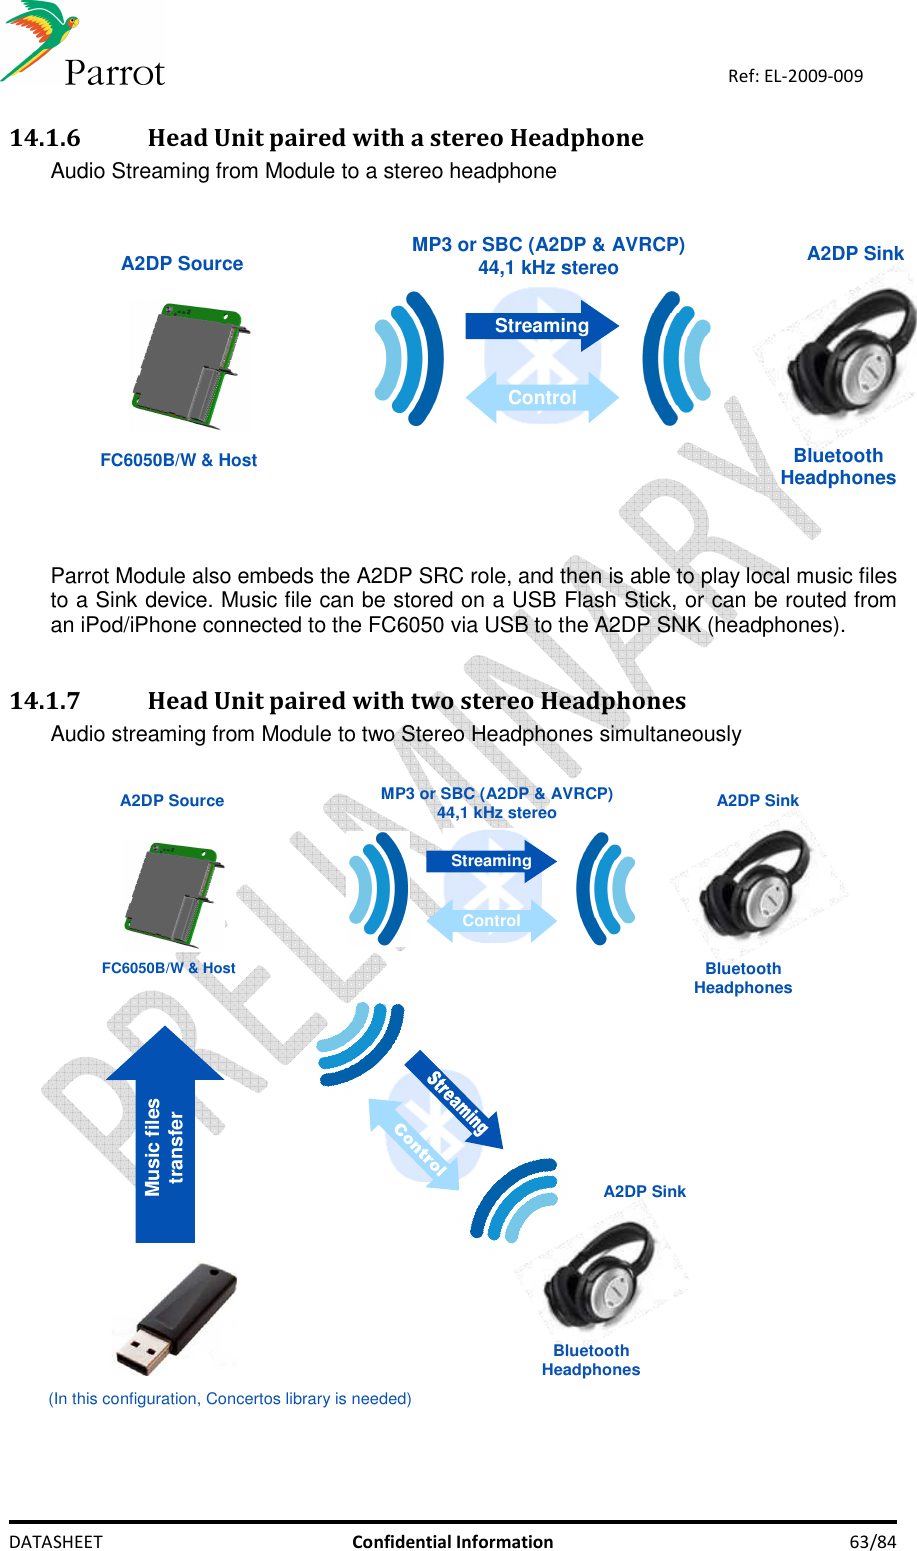    DATASHEET  Confidential Information  63/84 Ref: EL-2009-009 14.1.6 Head Unit paired with a stereo Headphone  Audio Streaming from Module to a stereo headphone    A2DP Sink A2DP SourceBluetooth HeadphonesMP3 or SBC (A2DP &amp; AVRCP)44,1 kHz stereo StreamingControlFC6050B/W &amp; Host  Parrot Module also embeds the A2DP SRC role, and then is able to play local music files to a Sink device. Music file can be stored on a USB Flash Stick, or can be routed from an iPod/iPhone connected to the FC6050 via USB to the A2DP SNK (headphones).  14.1.7 Head Unit paired with two stereo Headphones  Audio streaming from Module to two Stereo Headphones simultaneously   A2DP Sink A2DP SourceBluetooth HeadphonesMP3 or SBC (A2DP &amp; AVRCP)44,1 kHz stereo StreamingControlBluetooth Headphones A2DP Sink Music files transfer (In this configuration, Concertos library is needed) FC6050B/W &amp; Host   